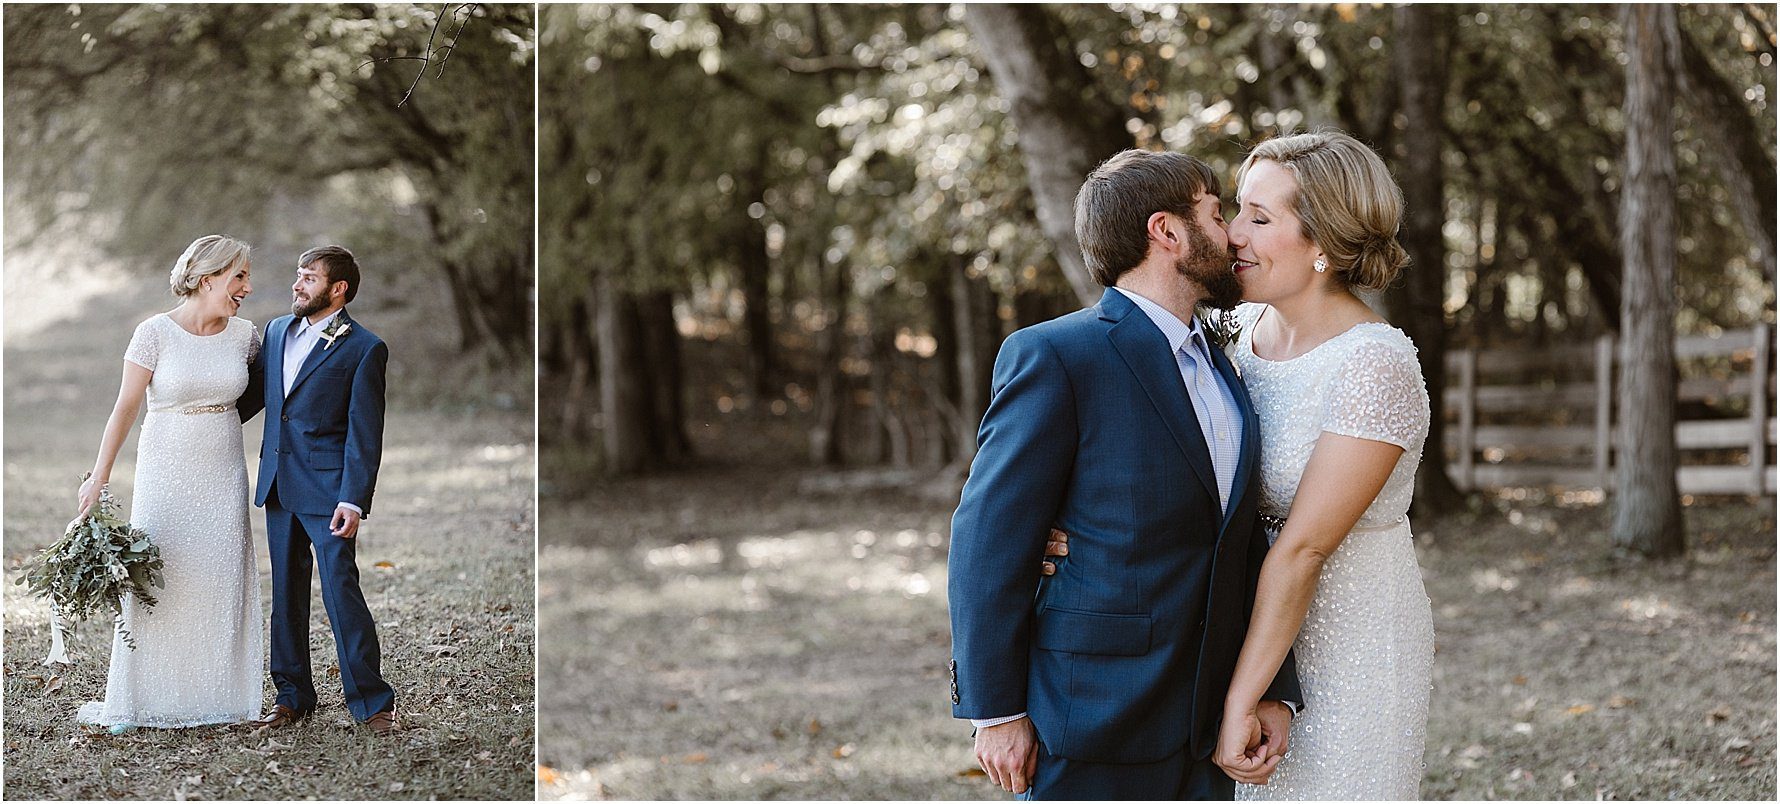 Weddings Photographers in Knoxville | Erin Morrison Photography www.erinmorrisonphotography.com